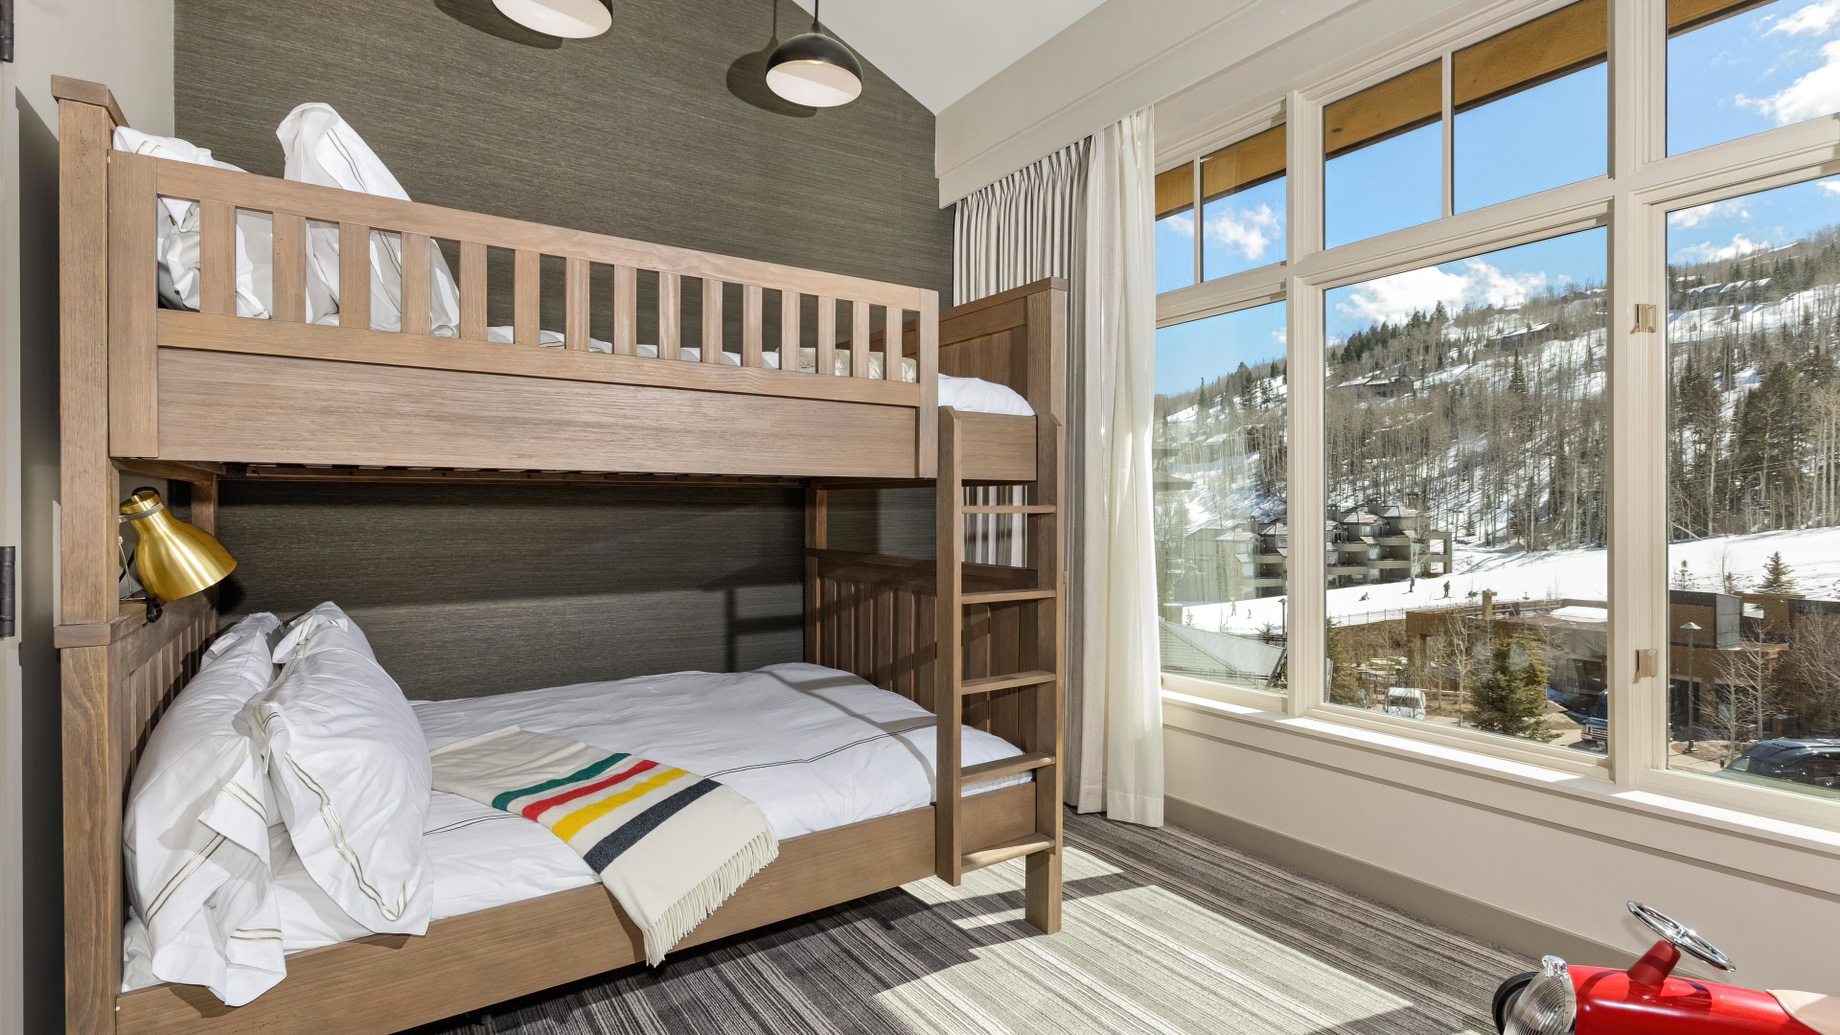 Viceroy Snowmass Luxury Resort – Aspen Snowmass Village, CO, USA – Three Bedroom Penthouse with Bunk Beds View